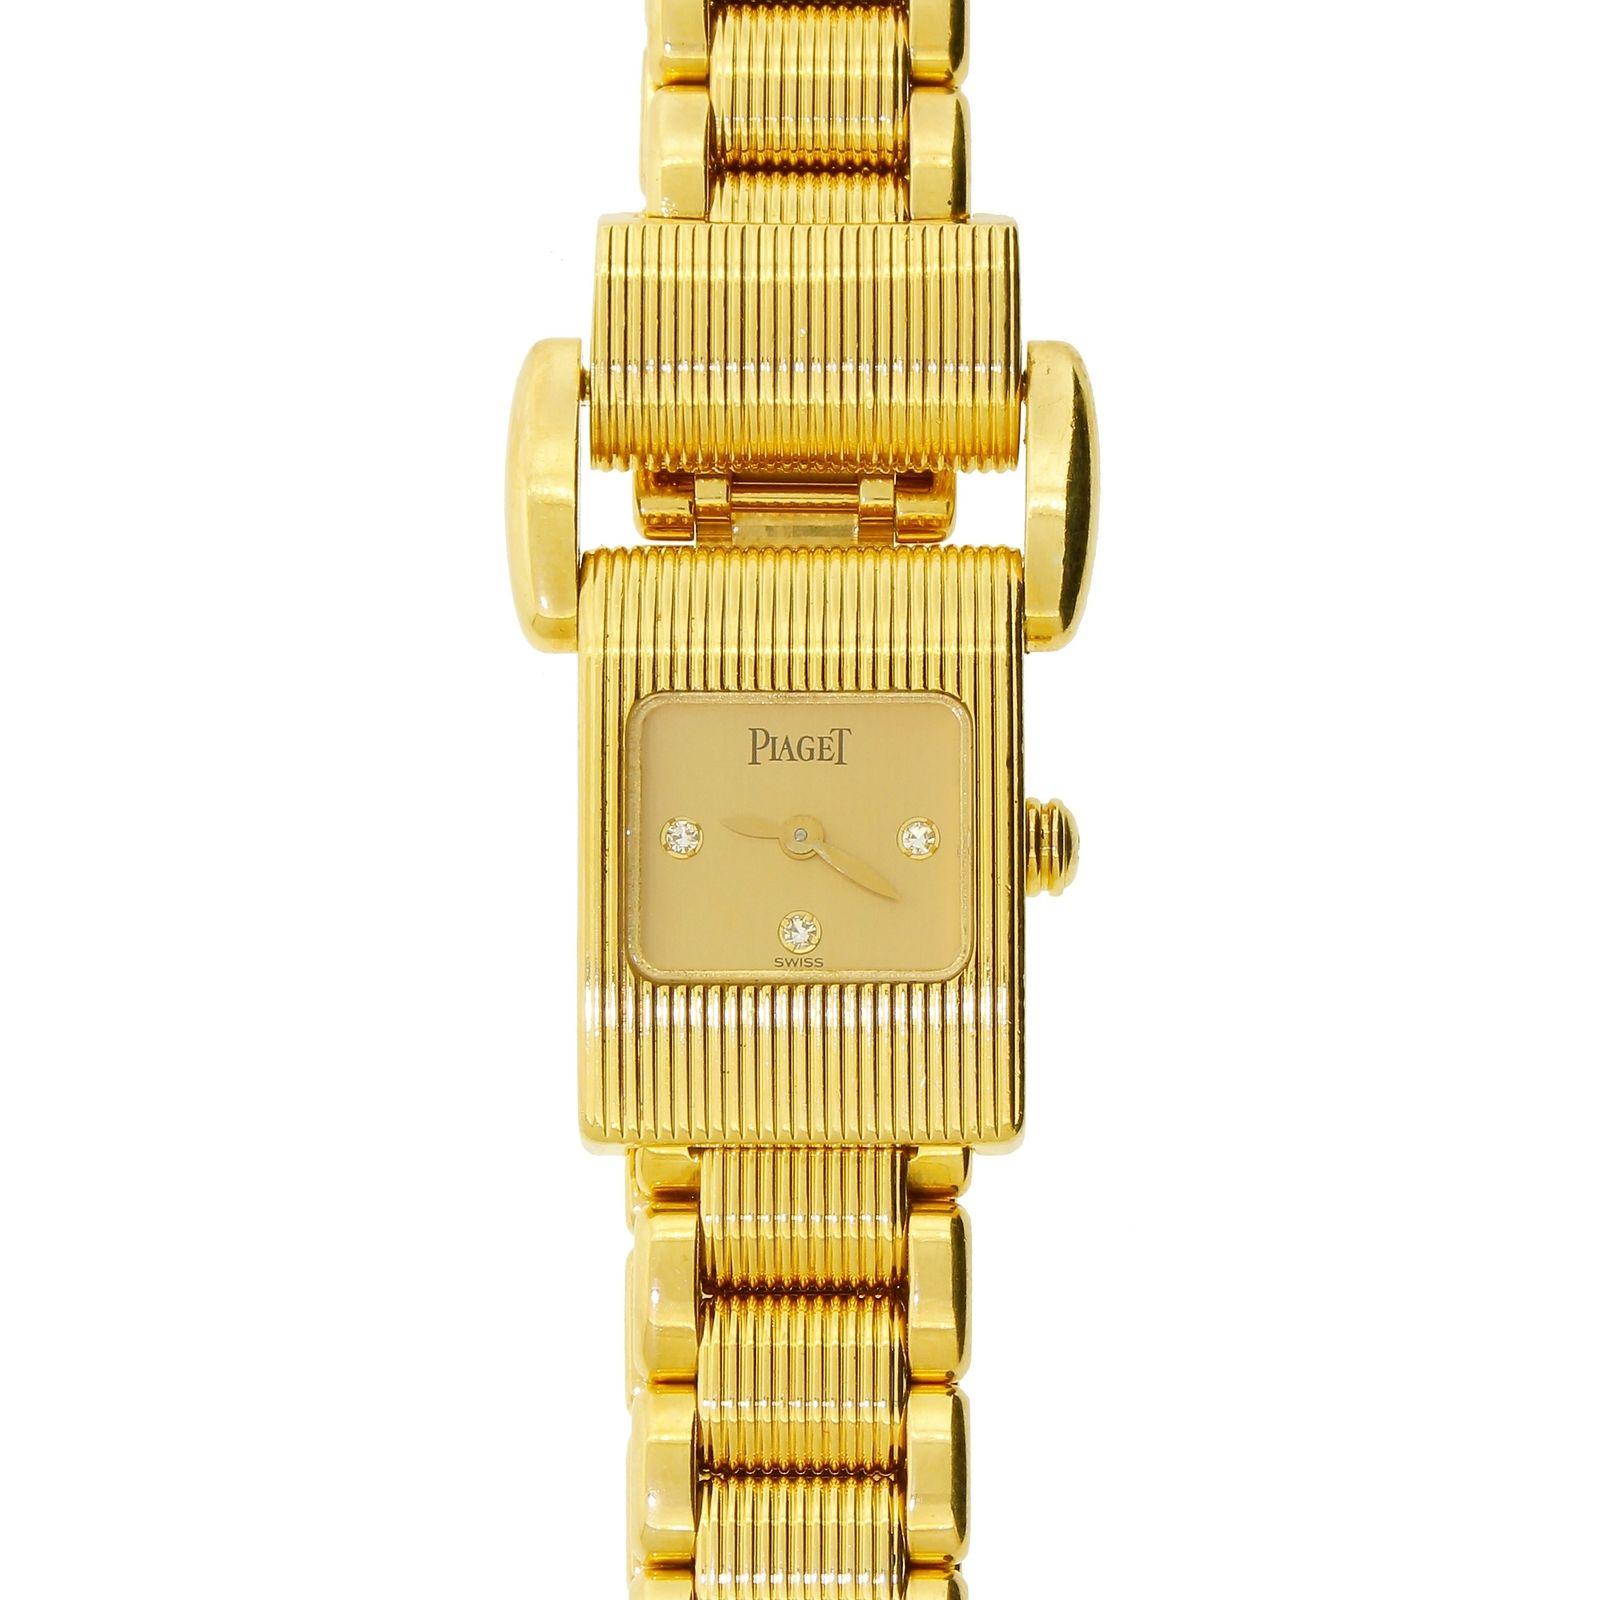  Piaget 18 Karat 750 Solid Gold Diamond Watch Tan Colored Dial Miss Protocole